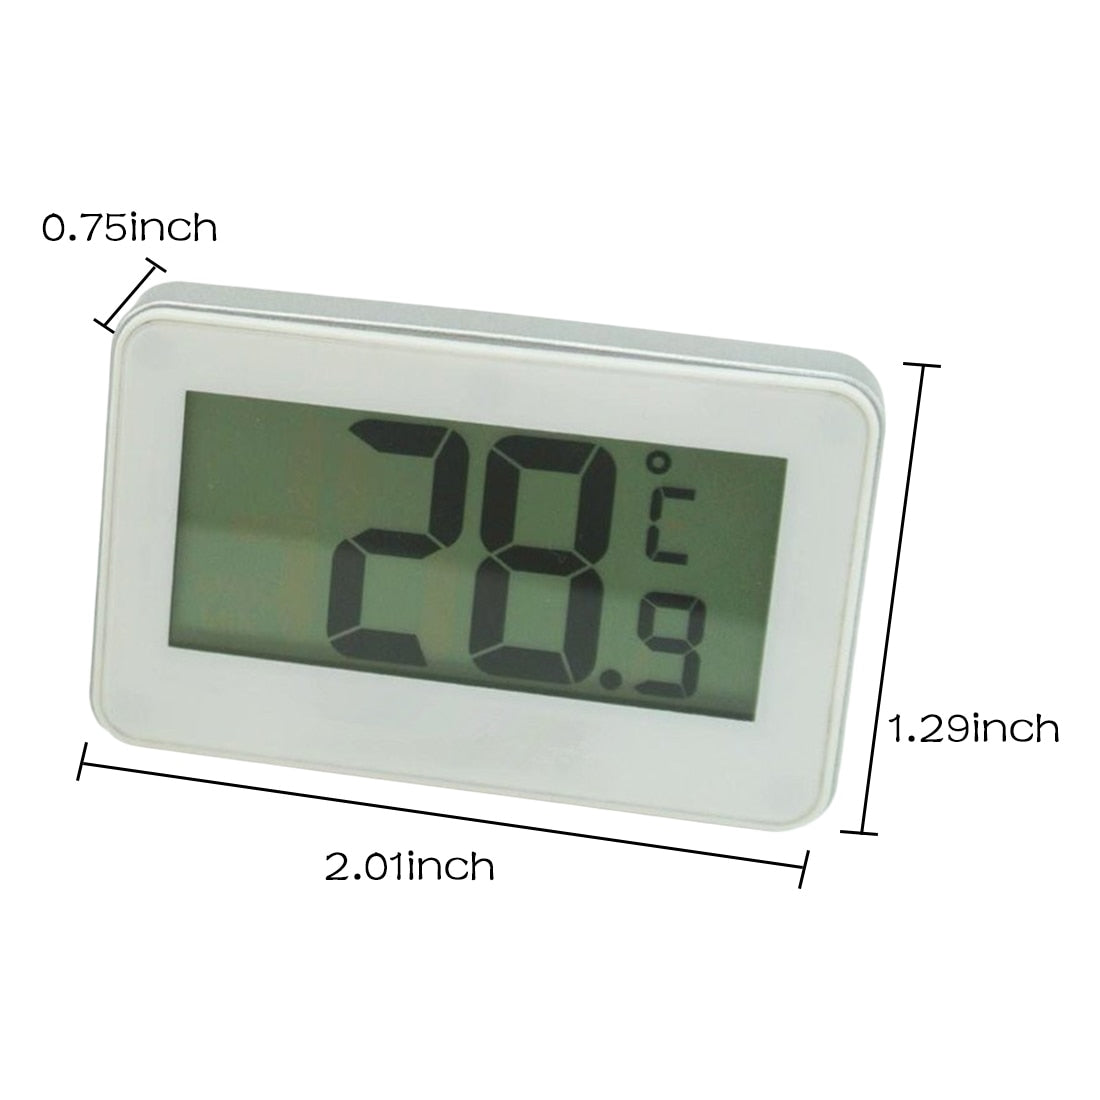 Digital LCD Room Thermometer Indoor Outdoor Temperature Meter W/Magnet Hook for Home Office Kitchen Refrigerator Thermometer - ebowsos